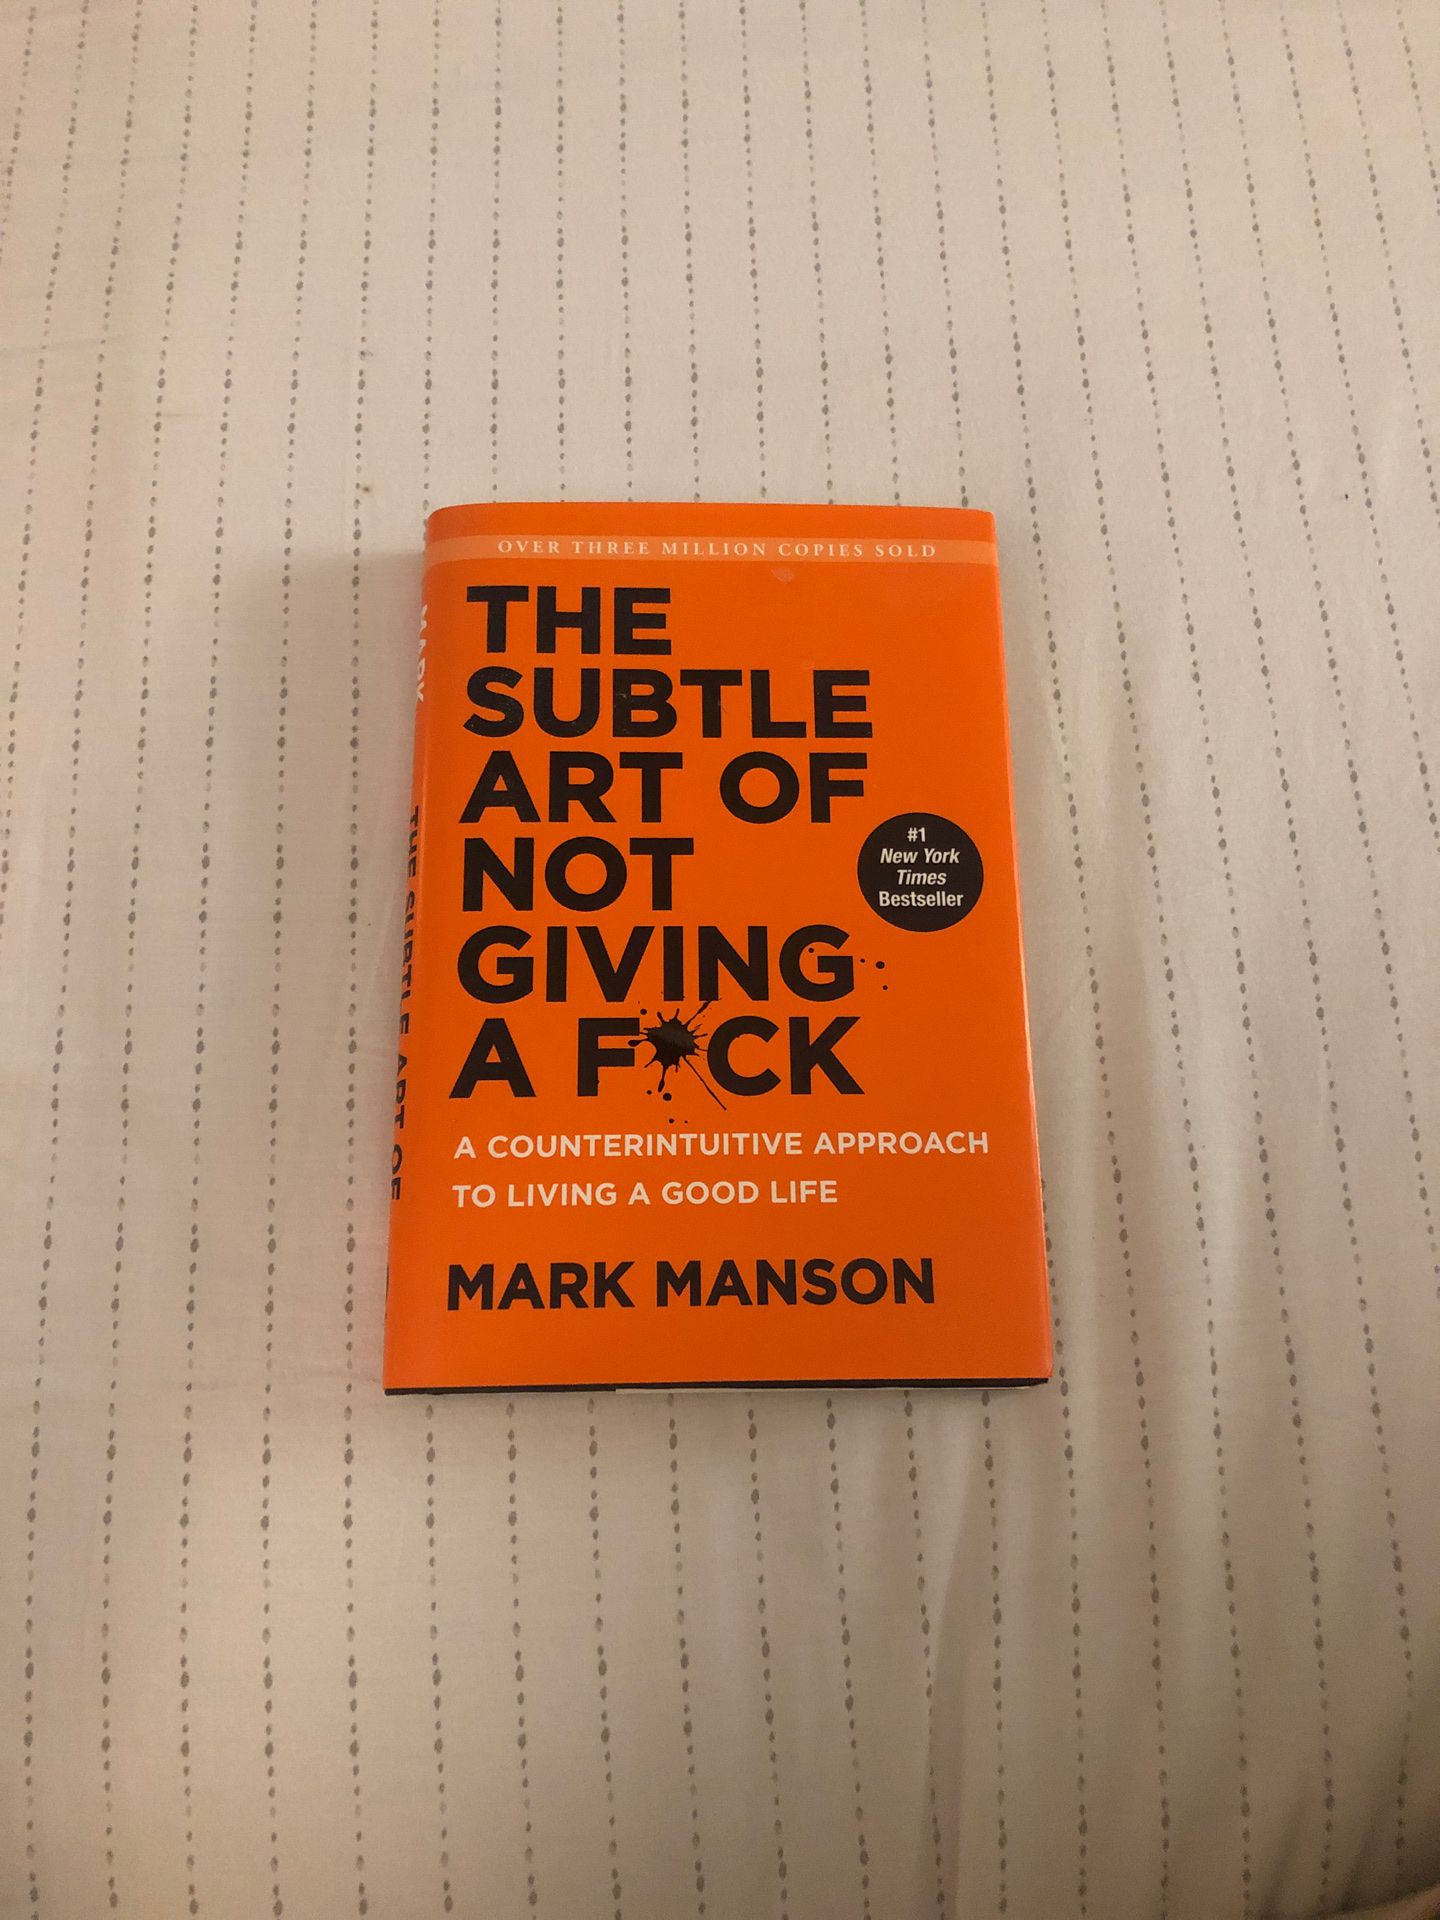 The subtle art of not giving a fuck, a book by Mark Manson